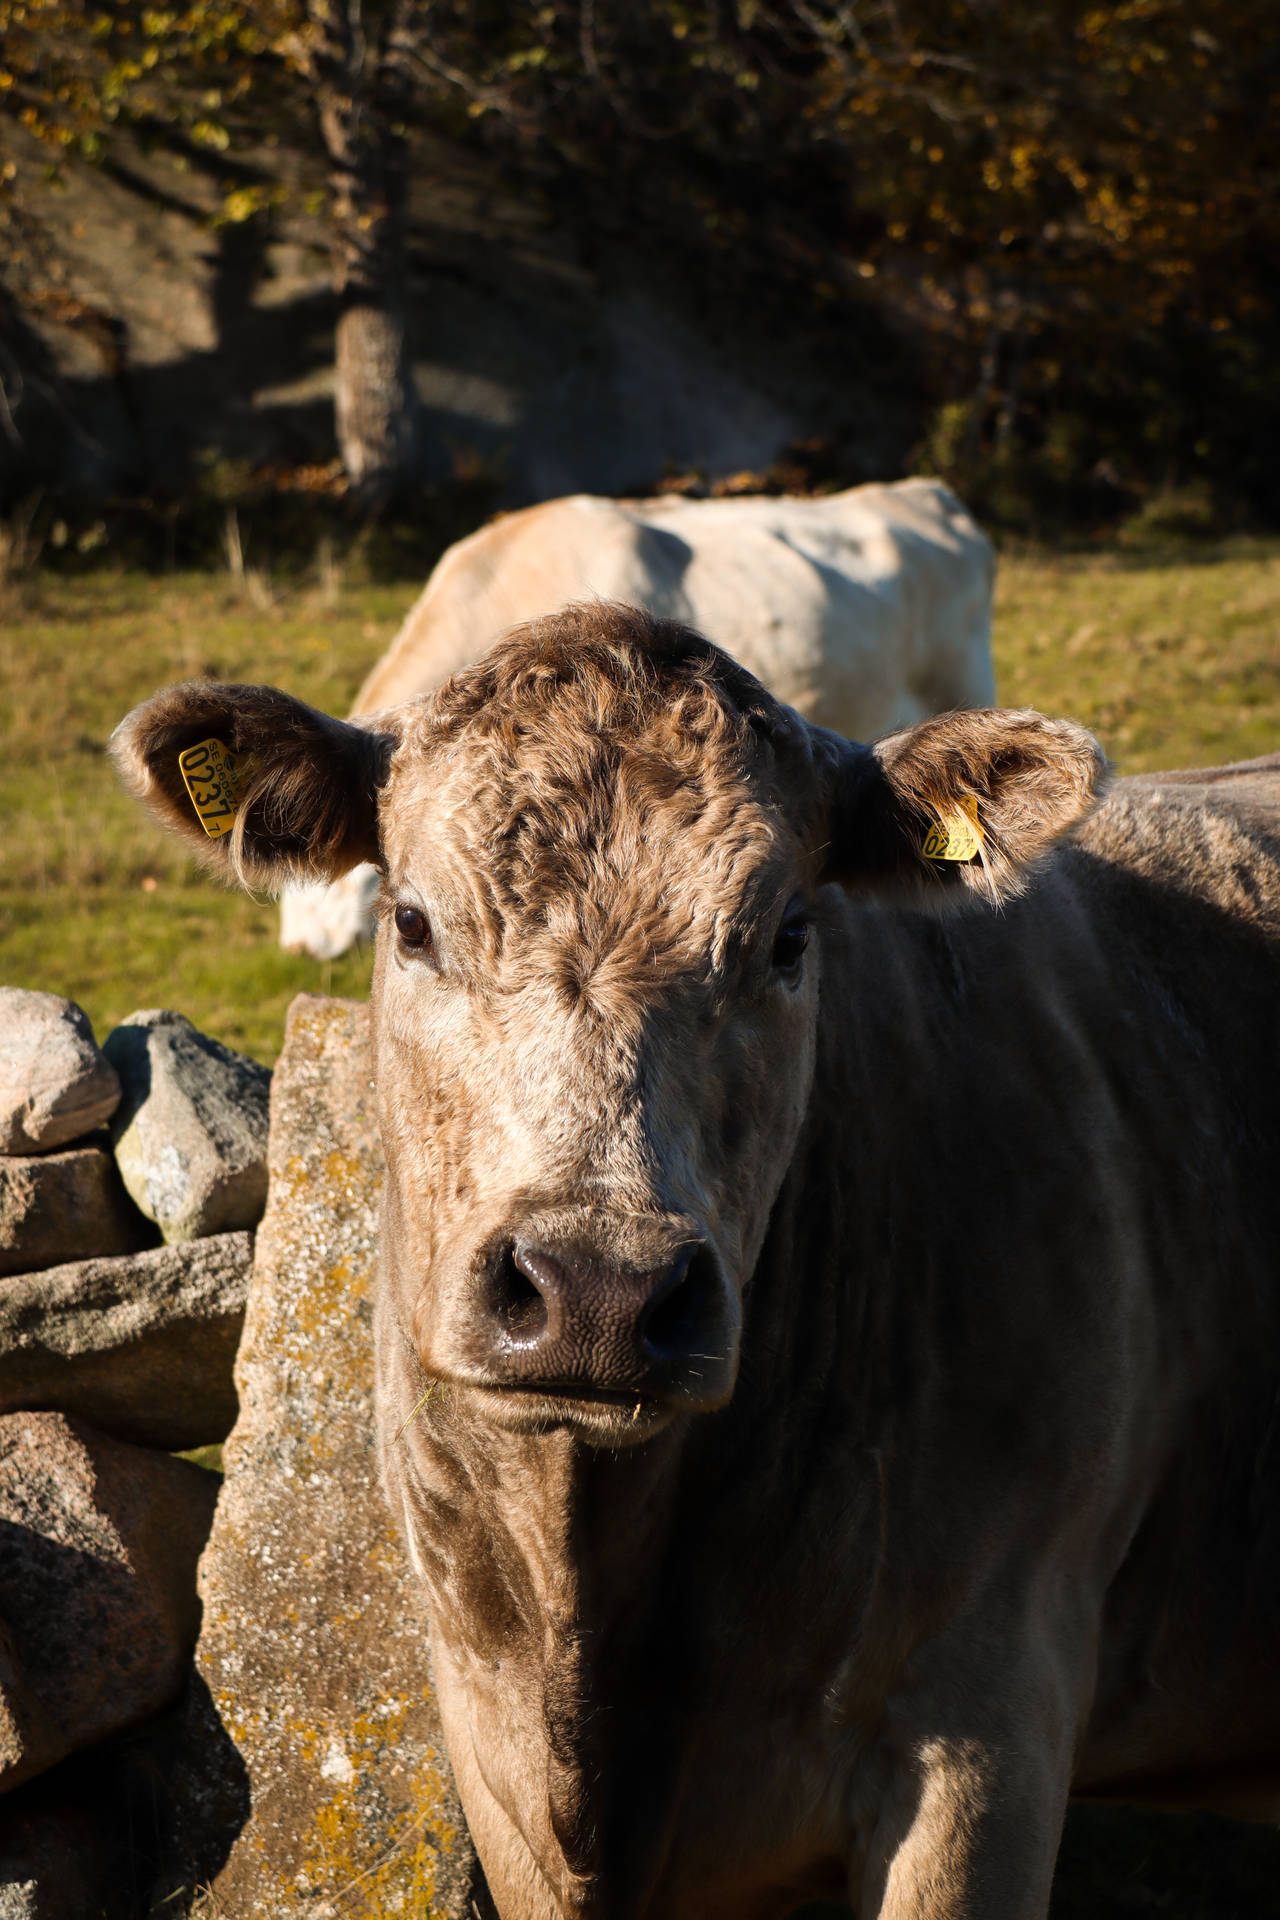 Cute Cow Near Rocks And Another Cow Background